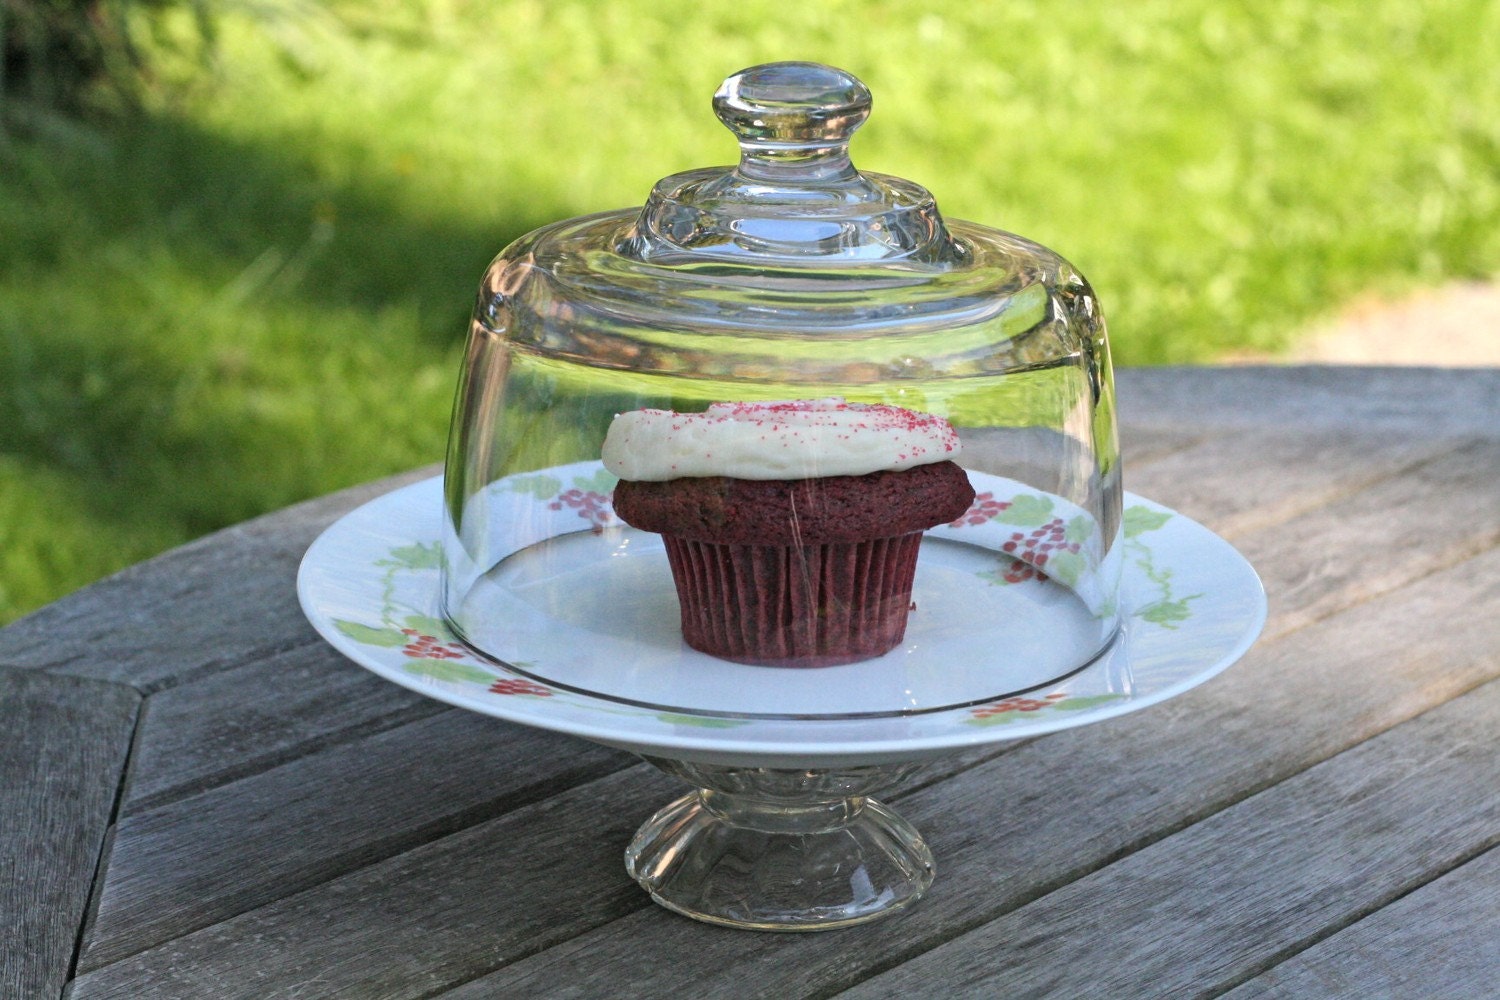 Cake stand with dome, cupcake stand or dessert display pedestal- Berry Sweet